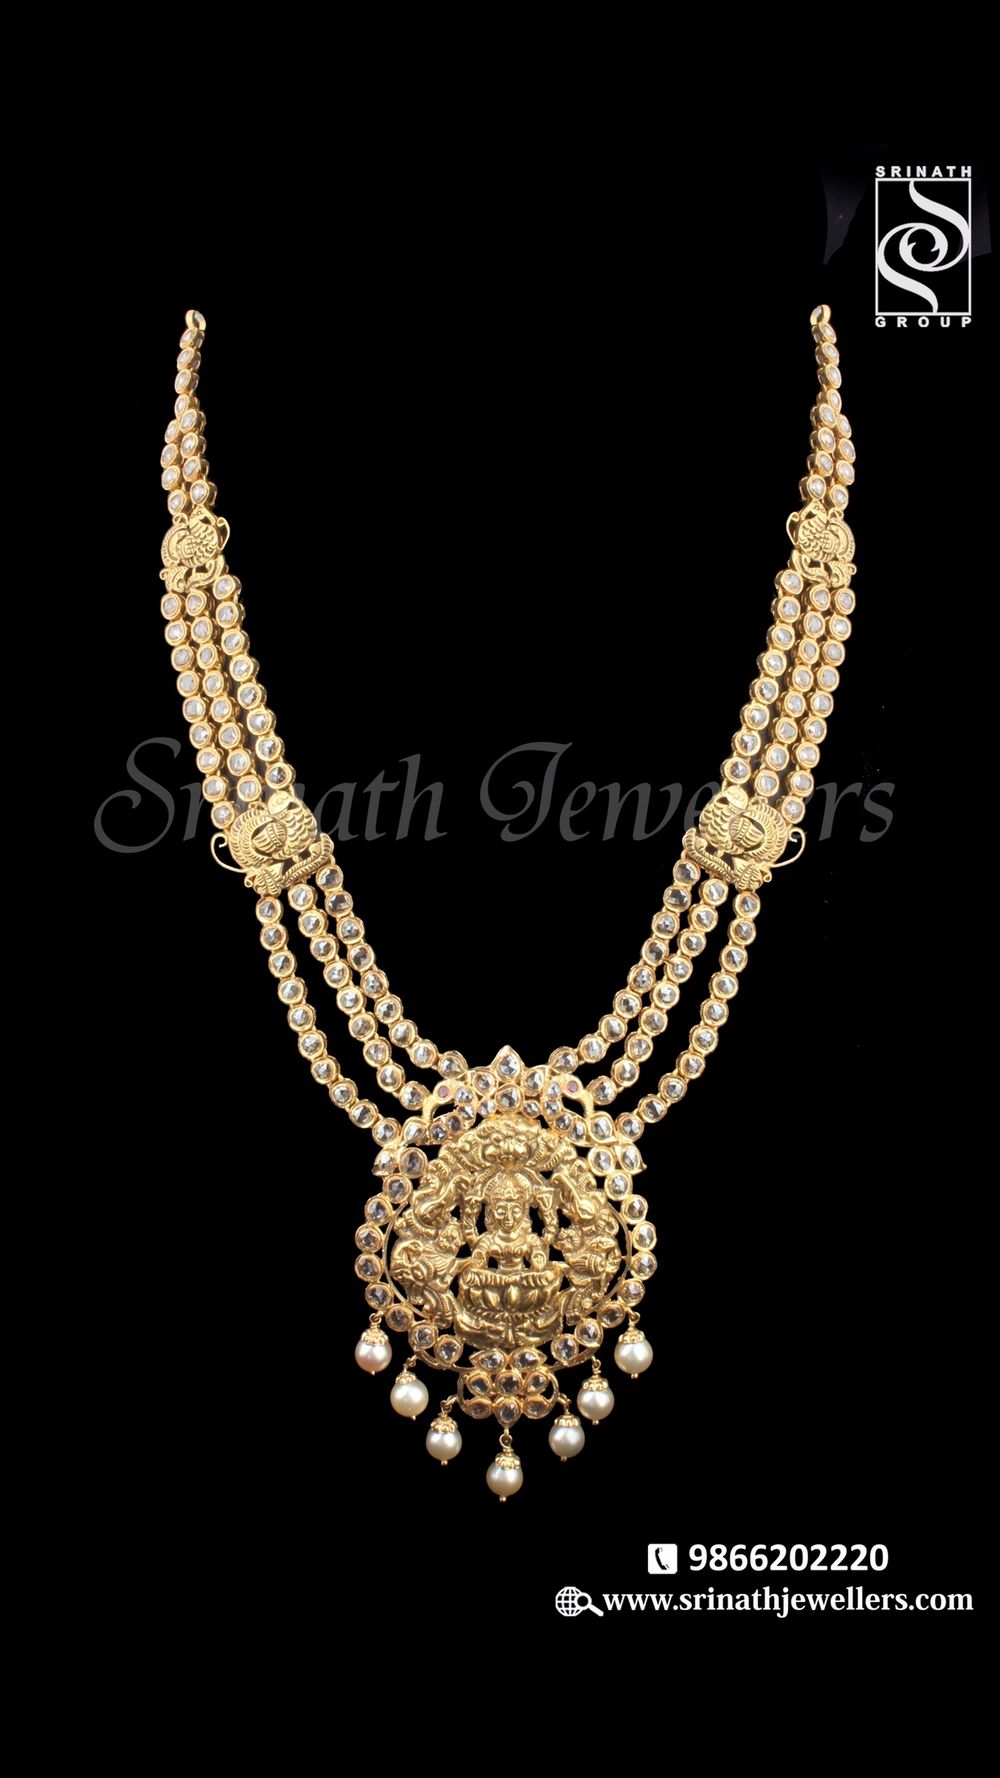 Photo From temple jewellery  - By Srinath Jewellers